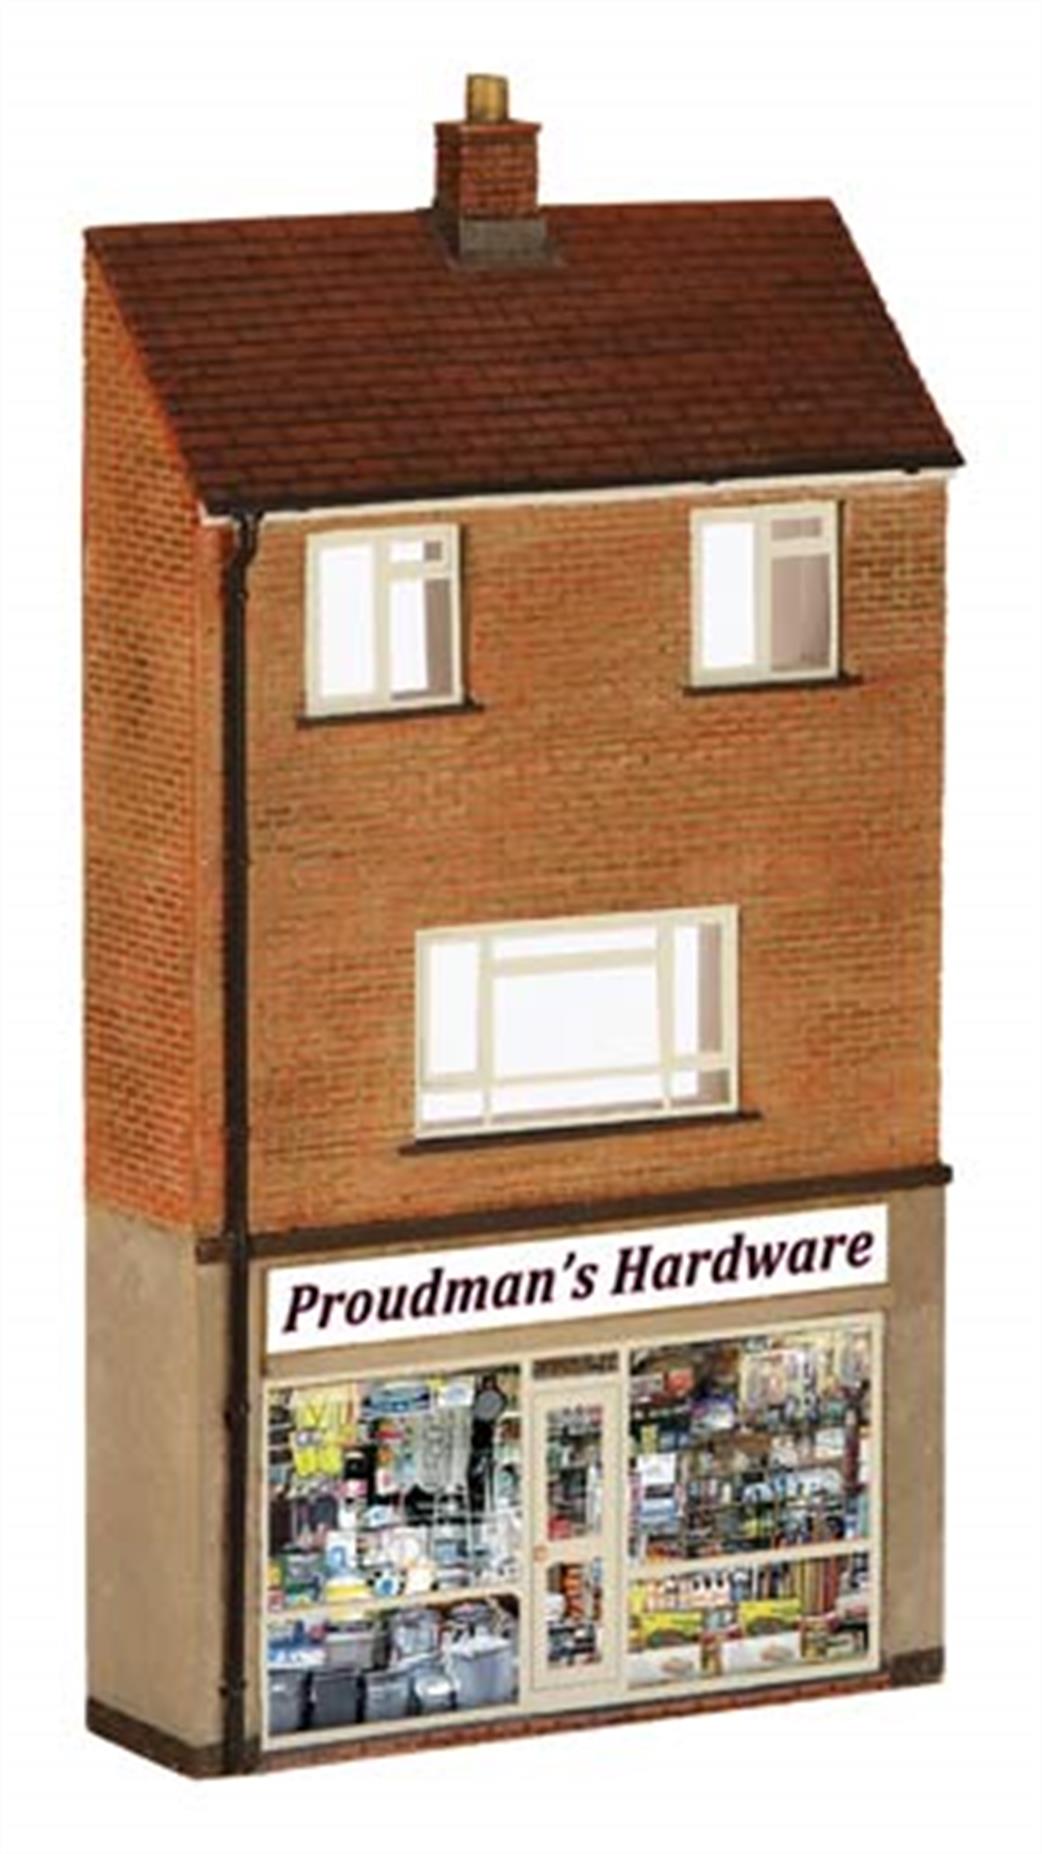 Bachmann OO 44-256 Scenecraft Low Relief Hardware Store with Maisonette